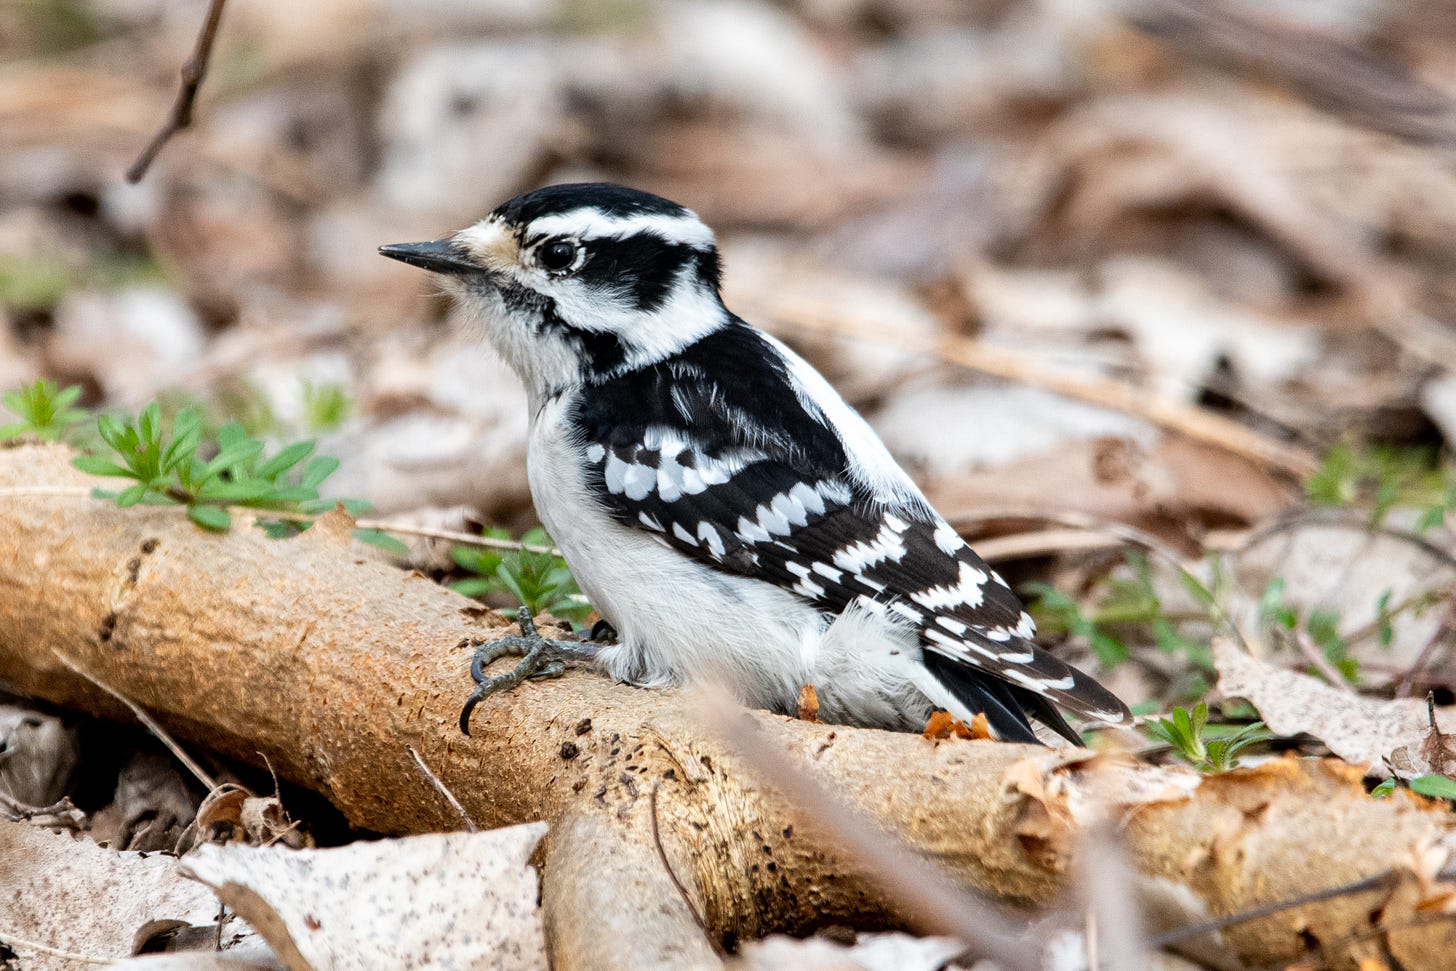 A downy woodpecker, standing on a branch on the ground, raises its head